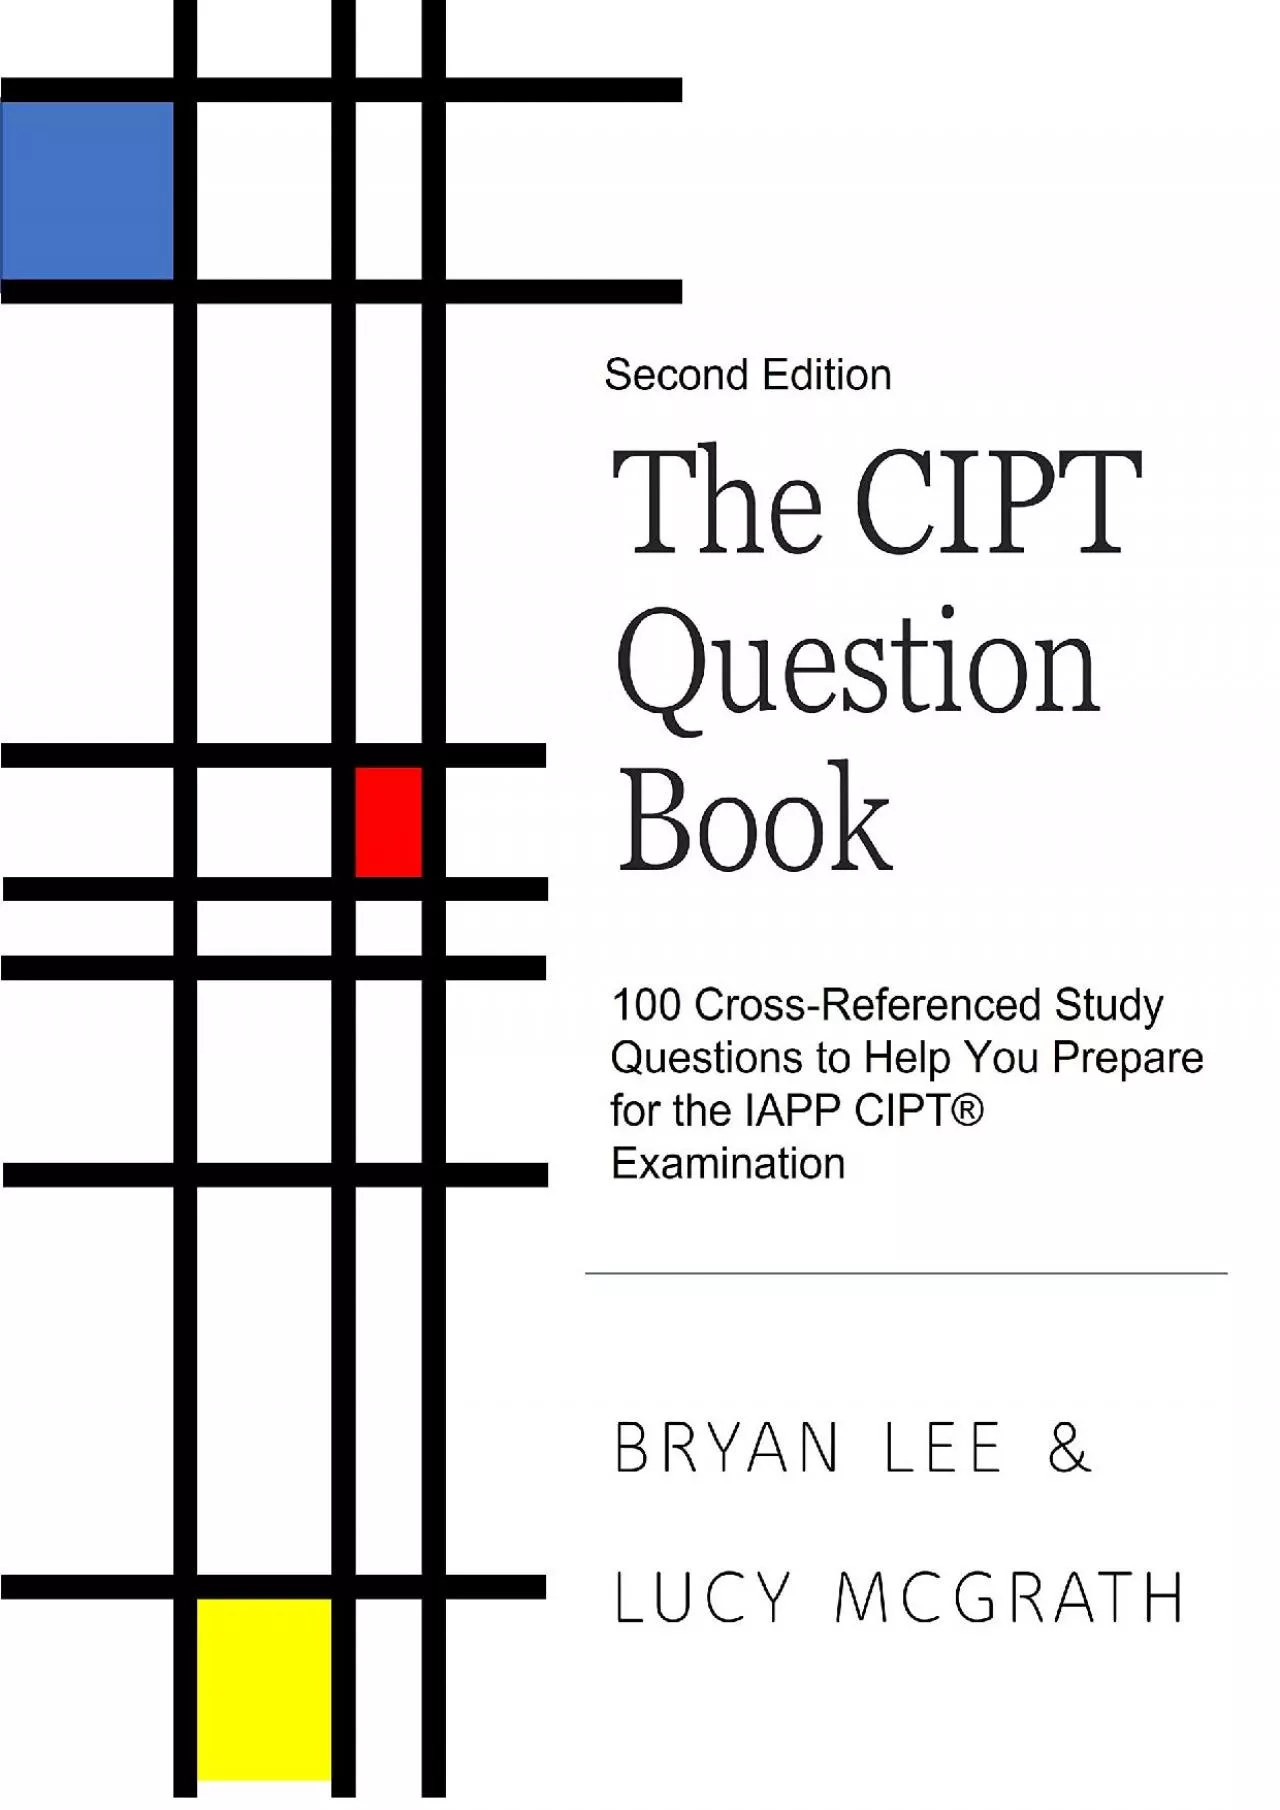 [READING BOOK]-The CIPT Question Book: 100 Cross-Referenced Study Questions to Help You